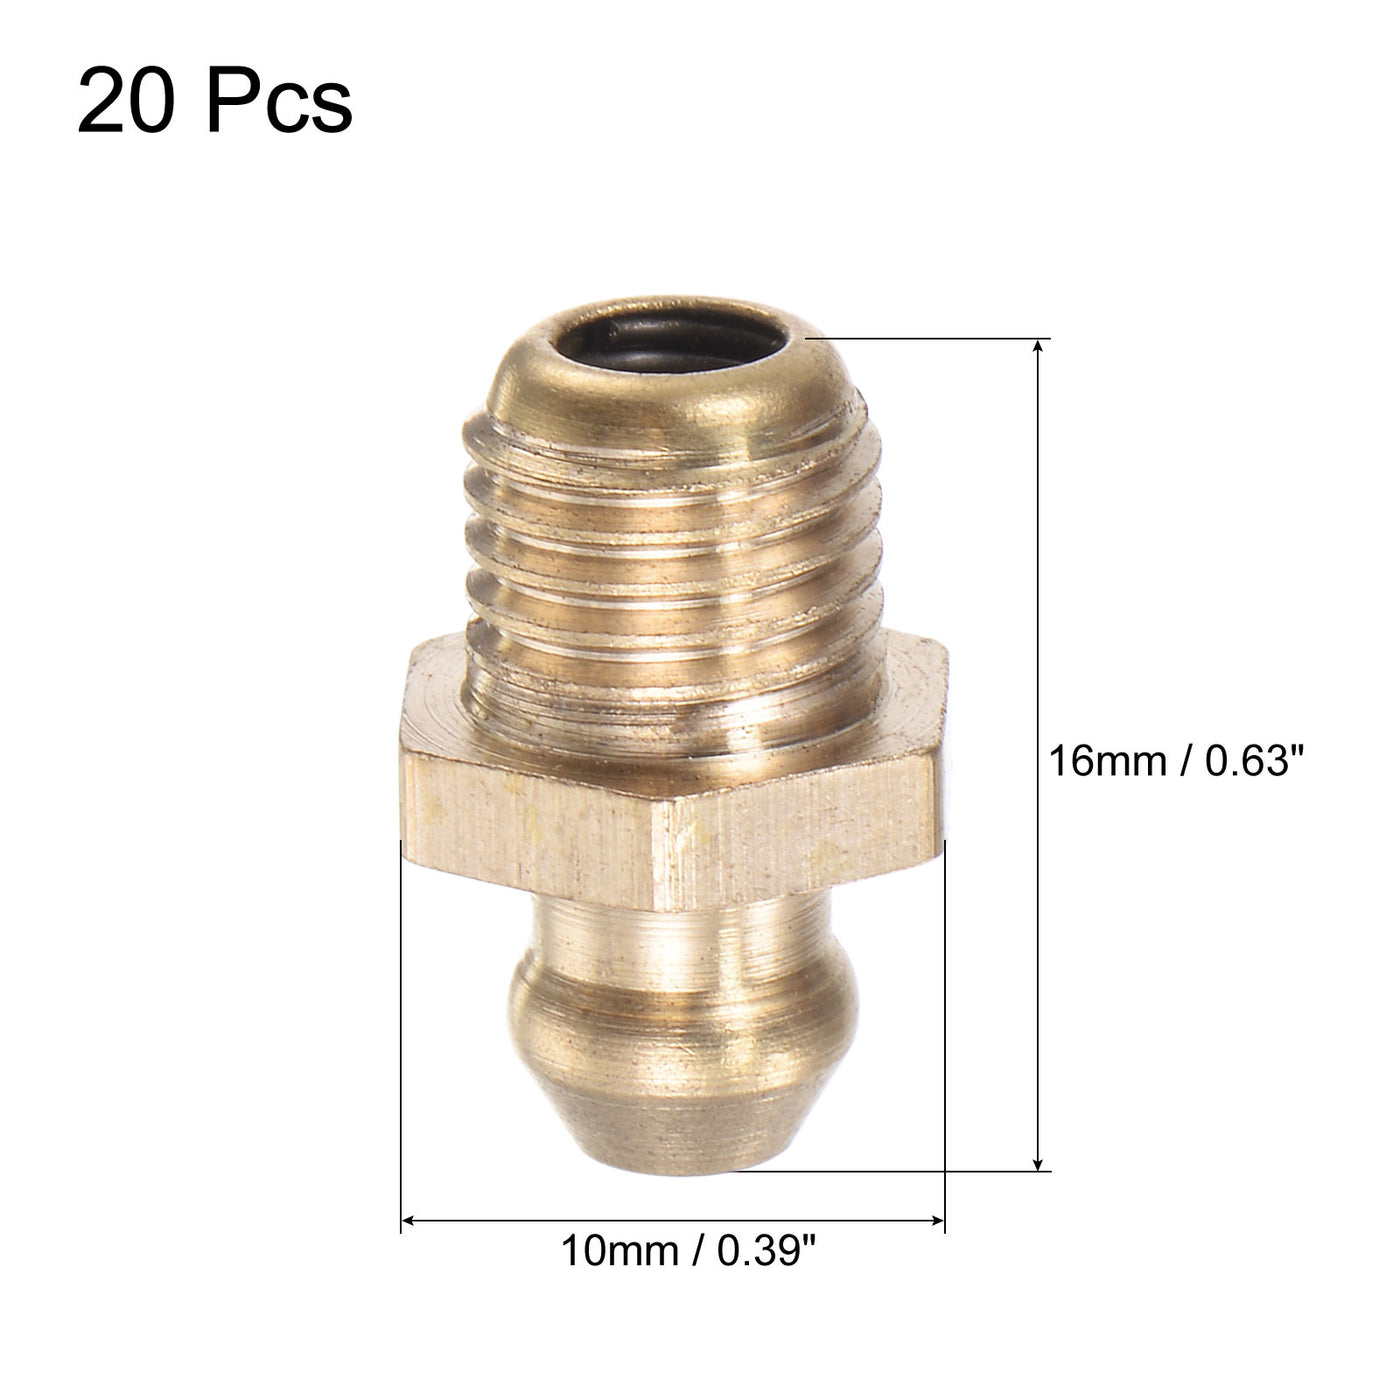 Uxcell Uxcell Brass Straight Hydraulic Grease Fitting M12 x 1mm Thread, 20Pcs